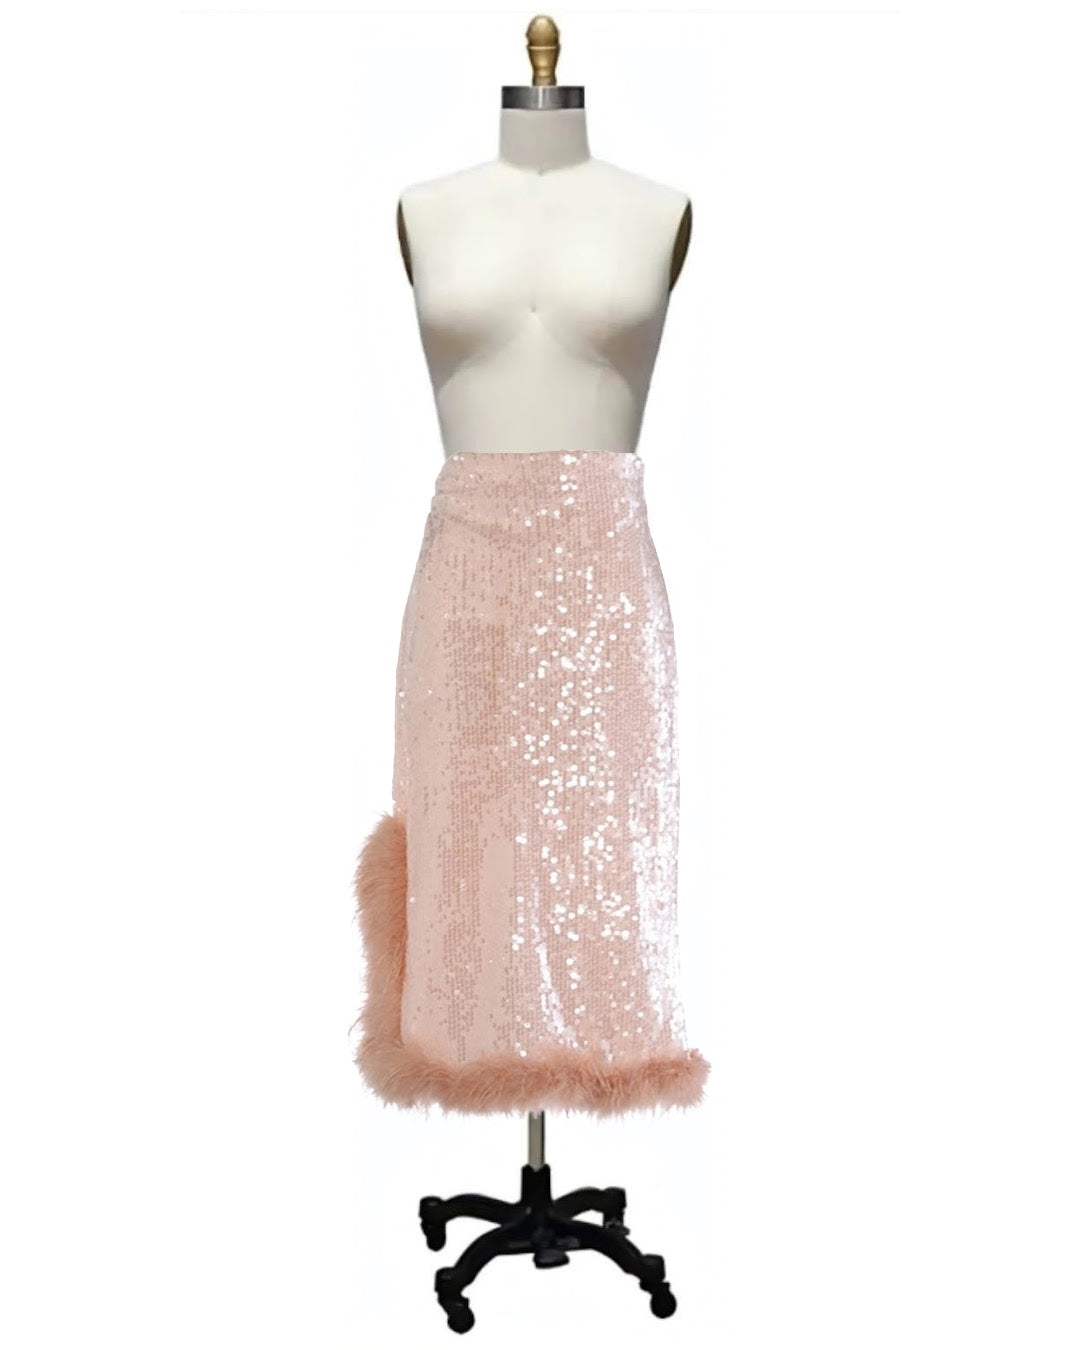 Runway- the High Waist Sequin and Marabou Feathers Pencil Skirt